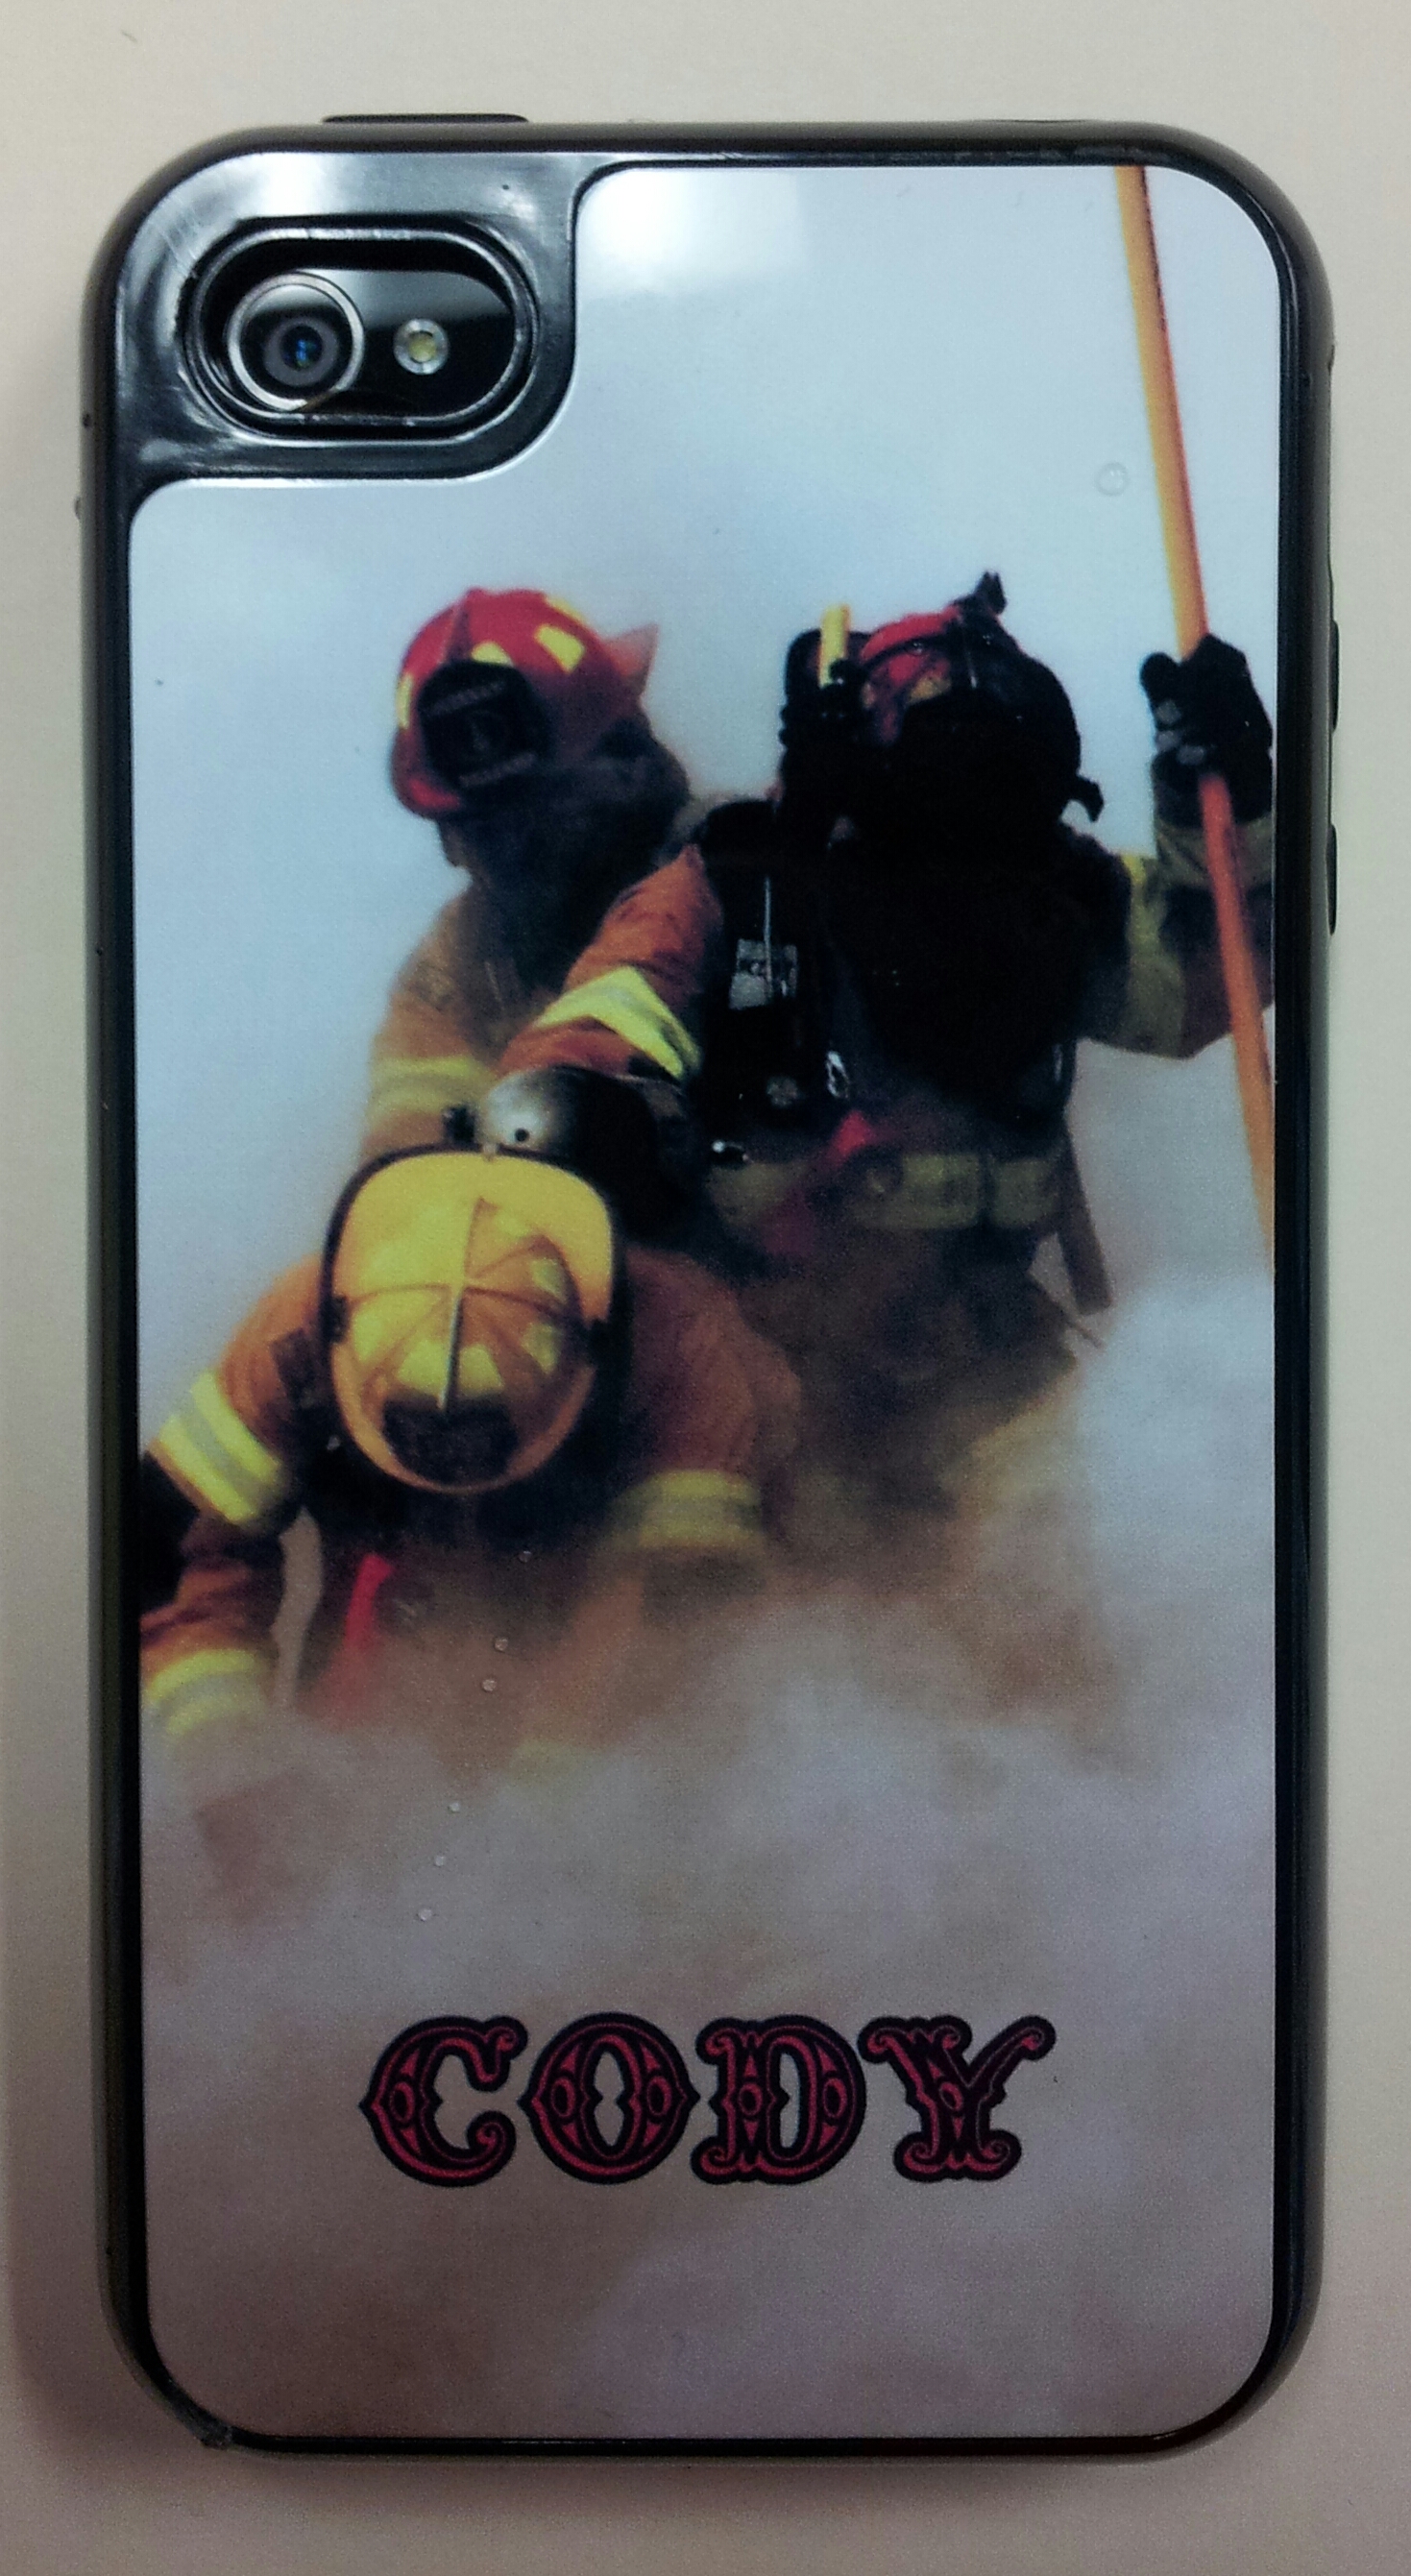 Firefighter Phone Cover made with sublimation printing